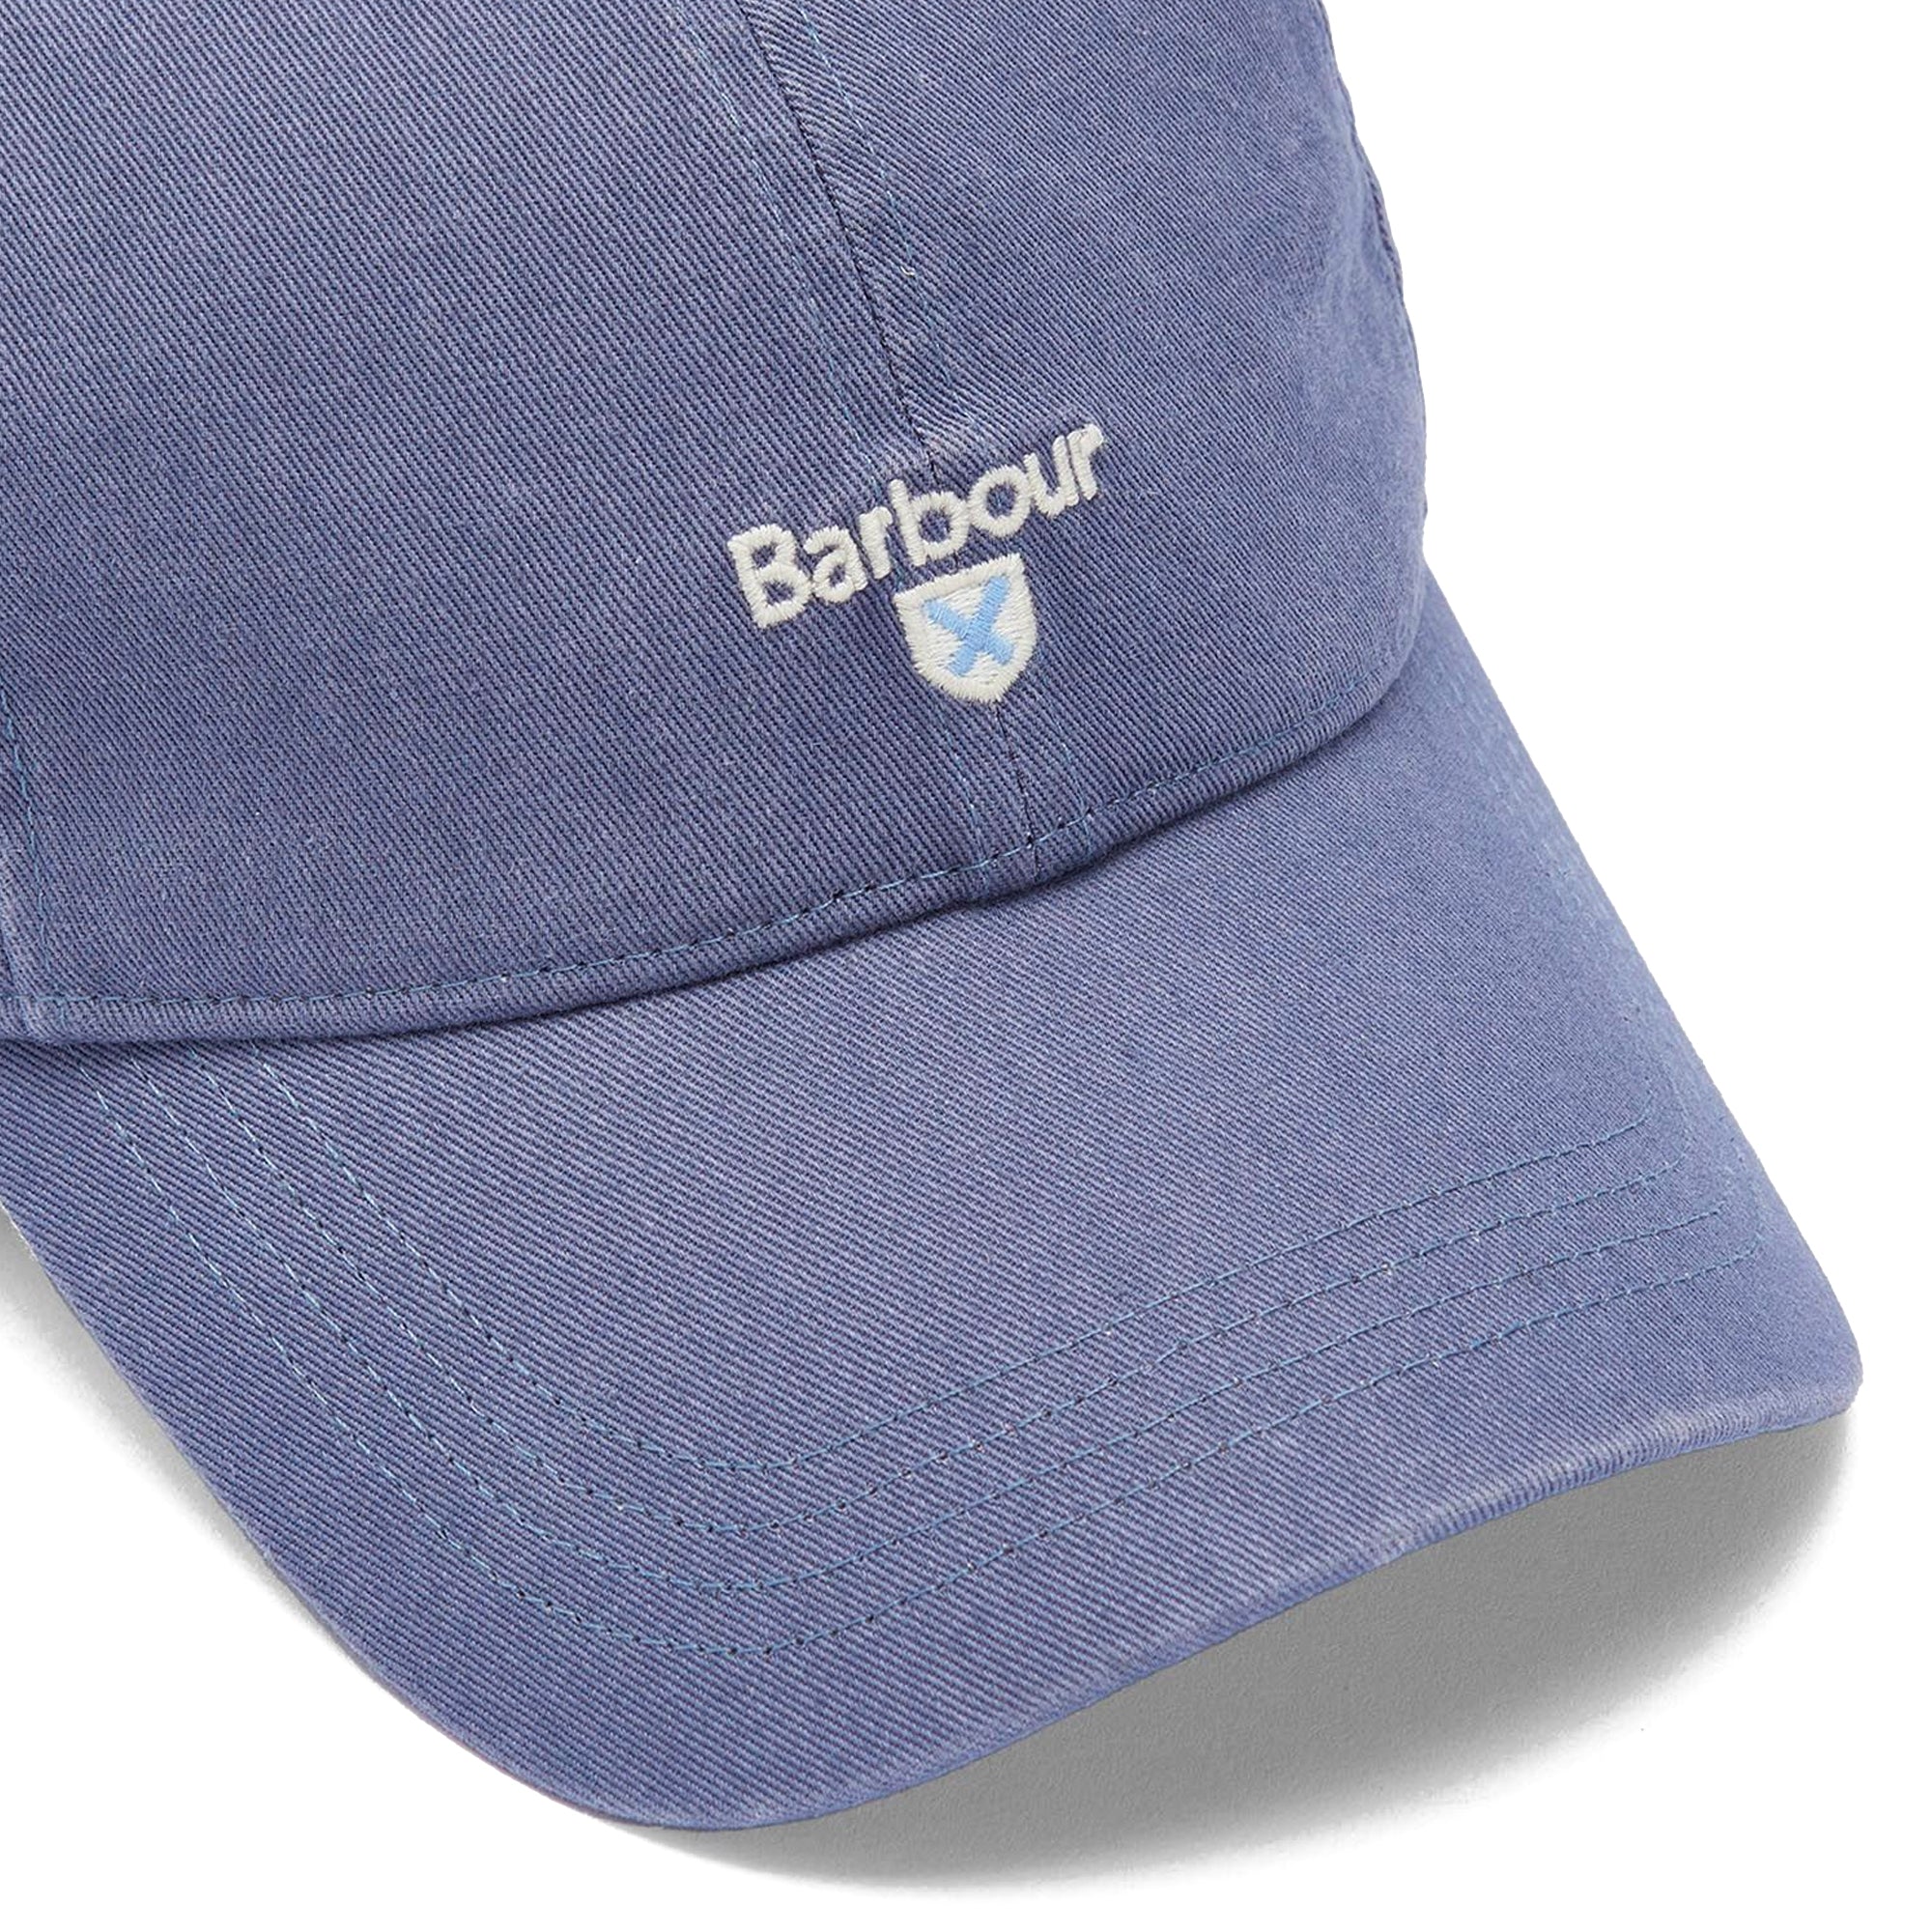 Barbour Cascade Washed Sports Cap - Washed Blue